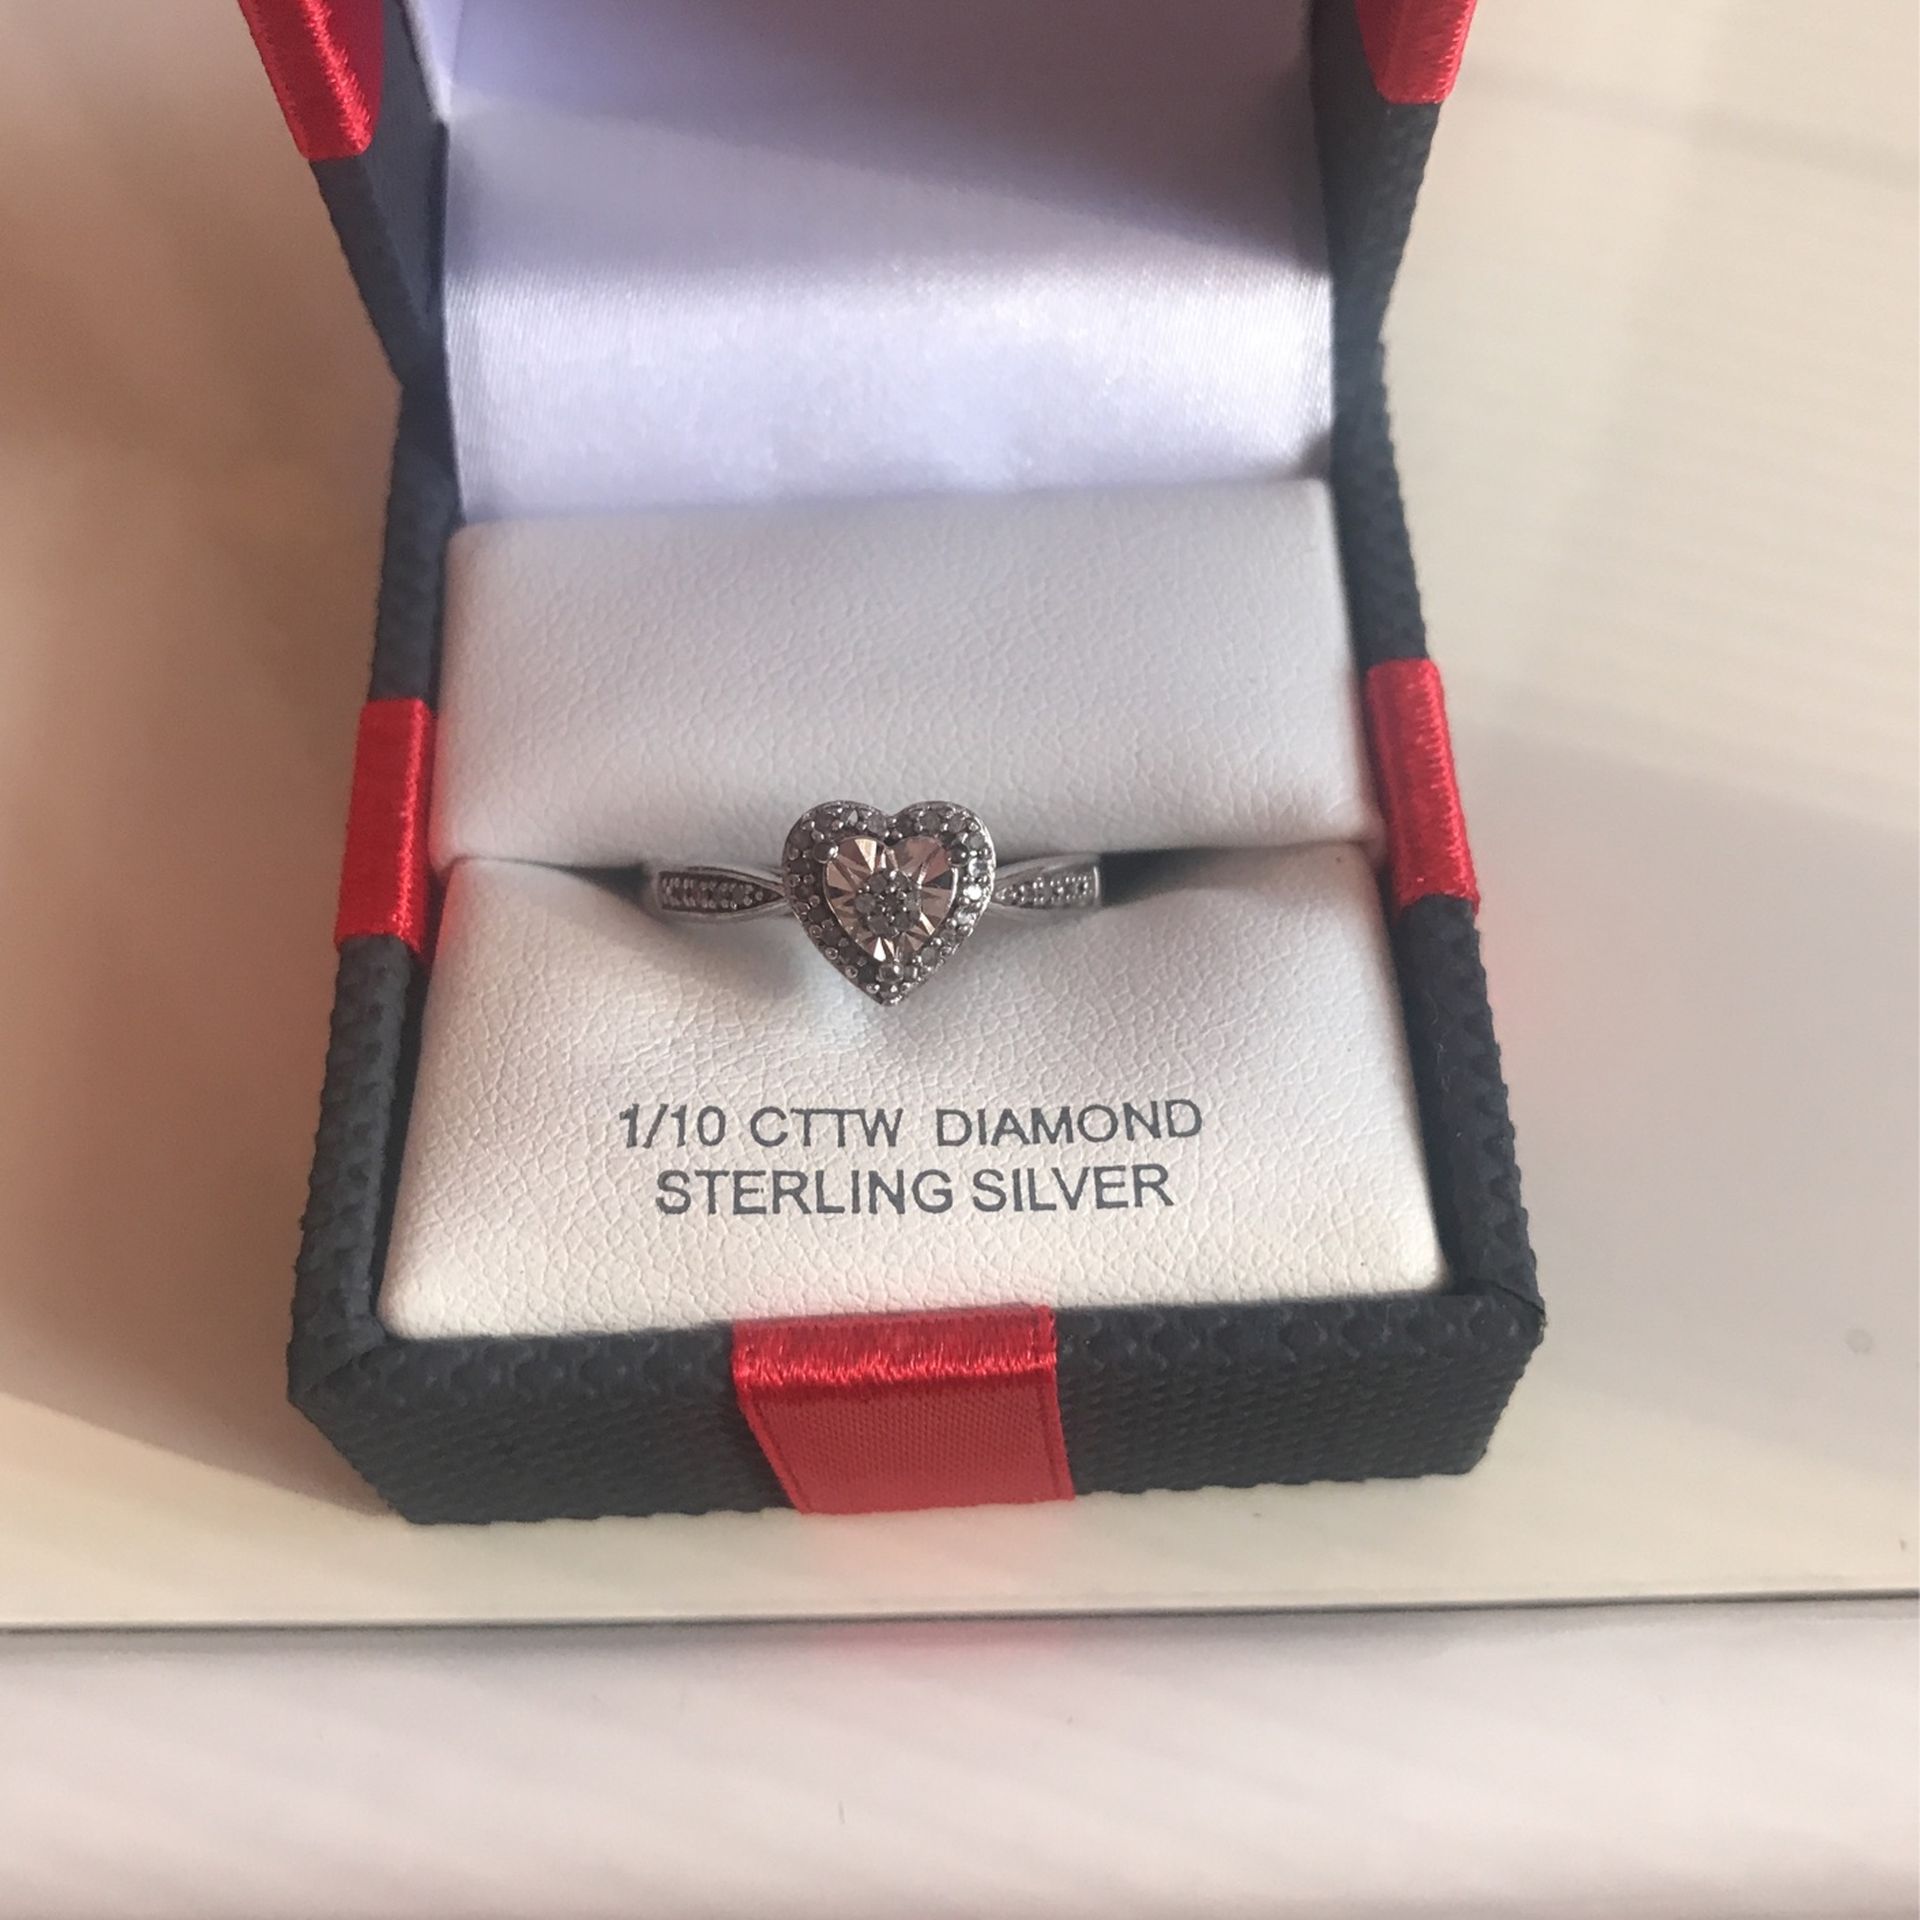 Beautiful Sterling Silver Small Diamond Ring For $30